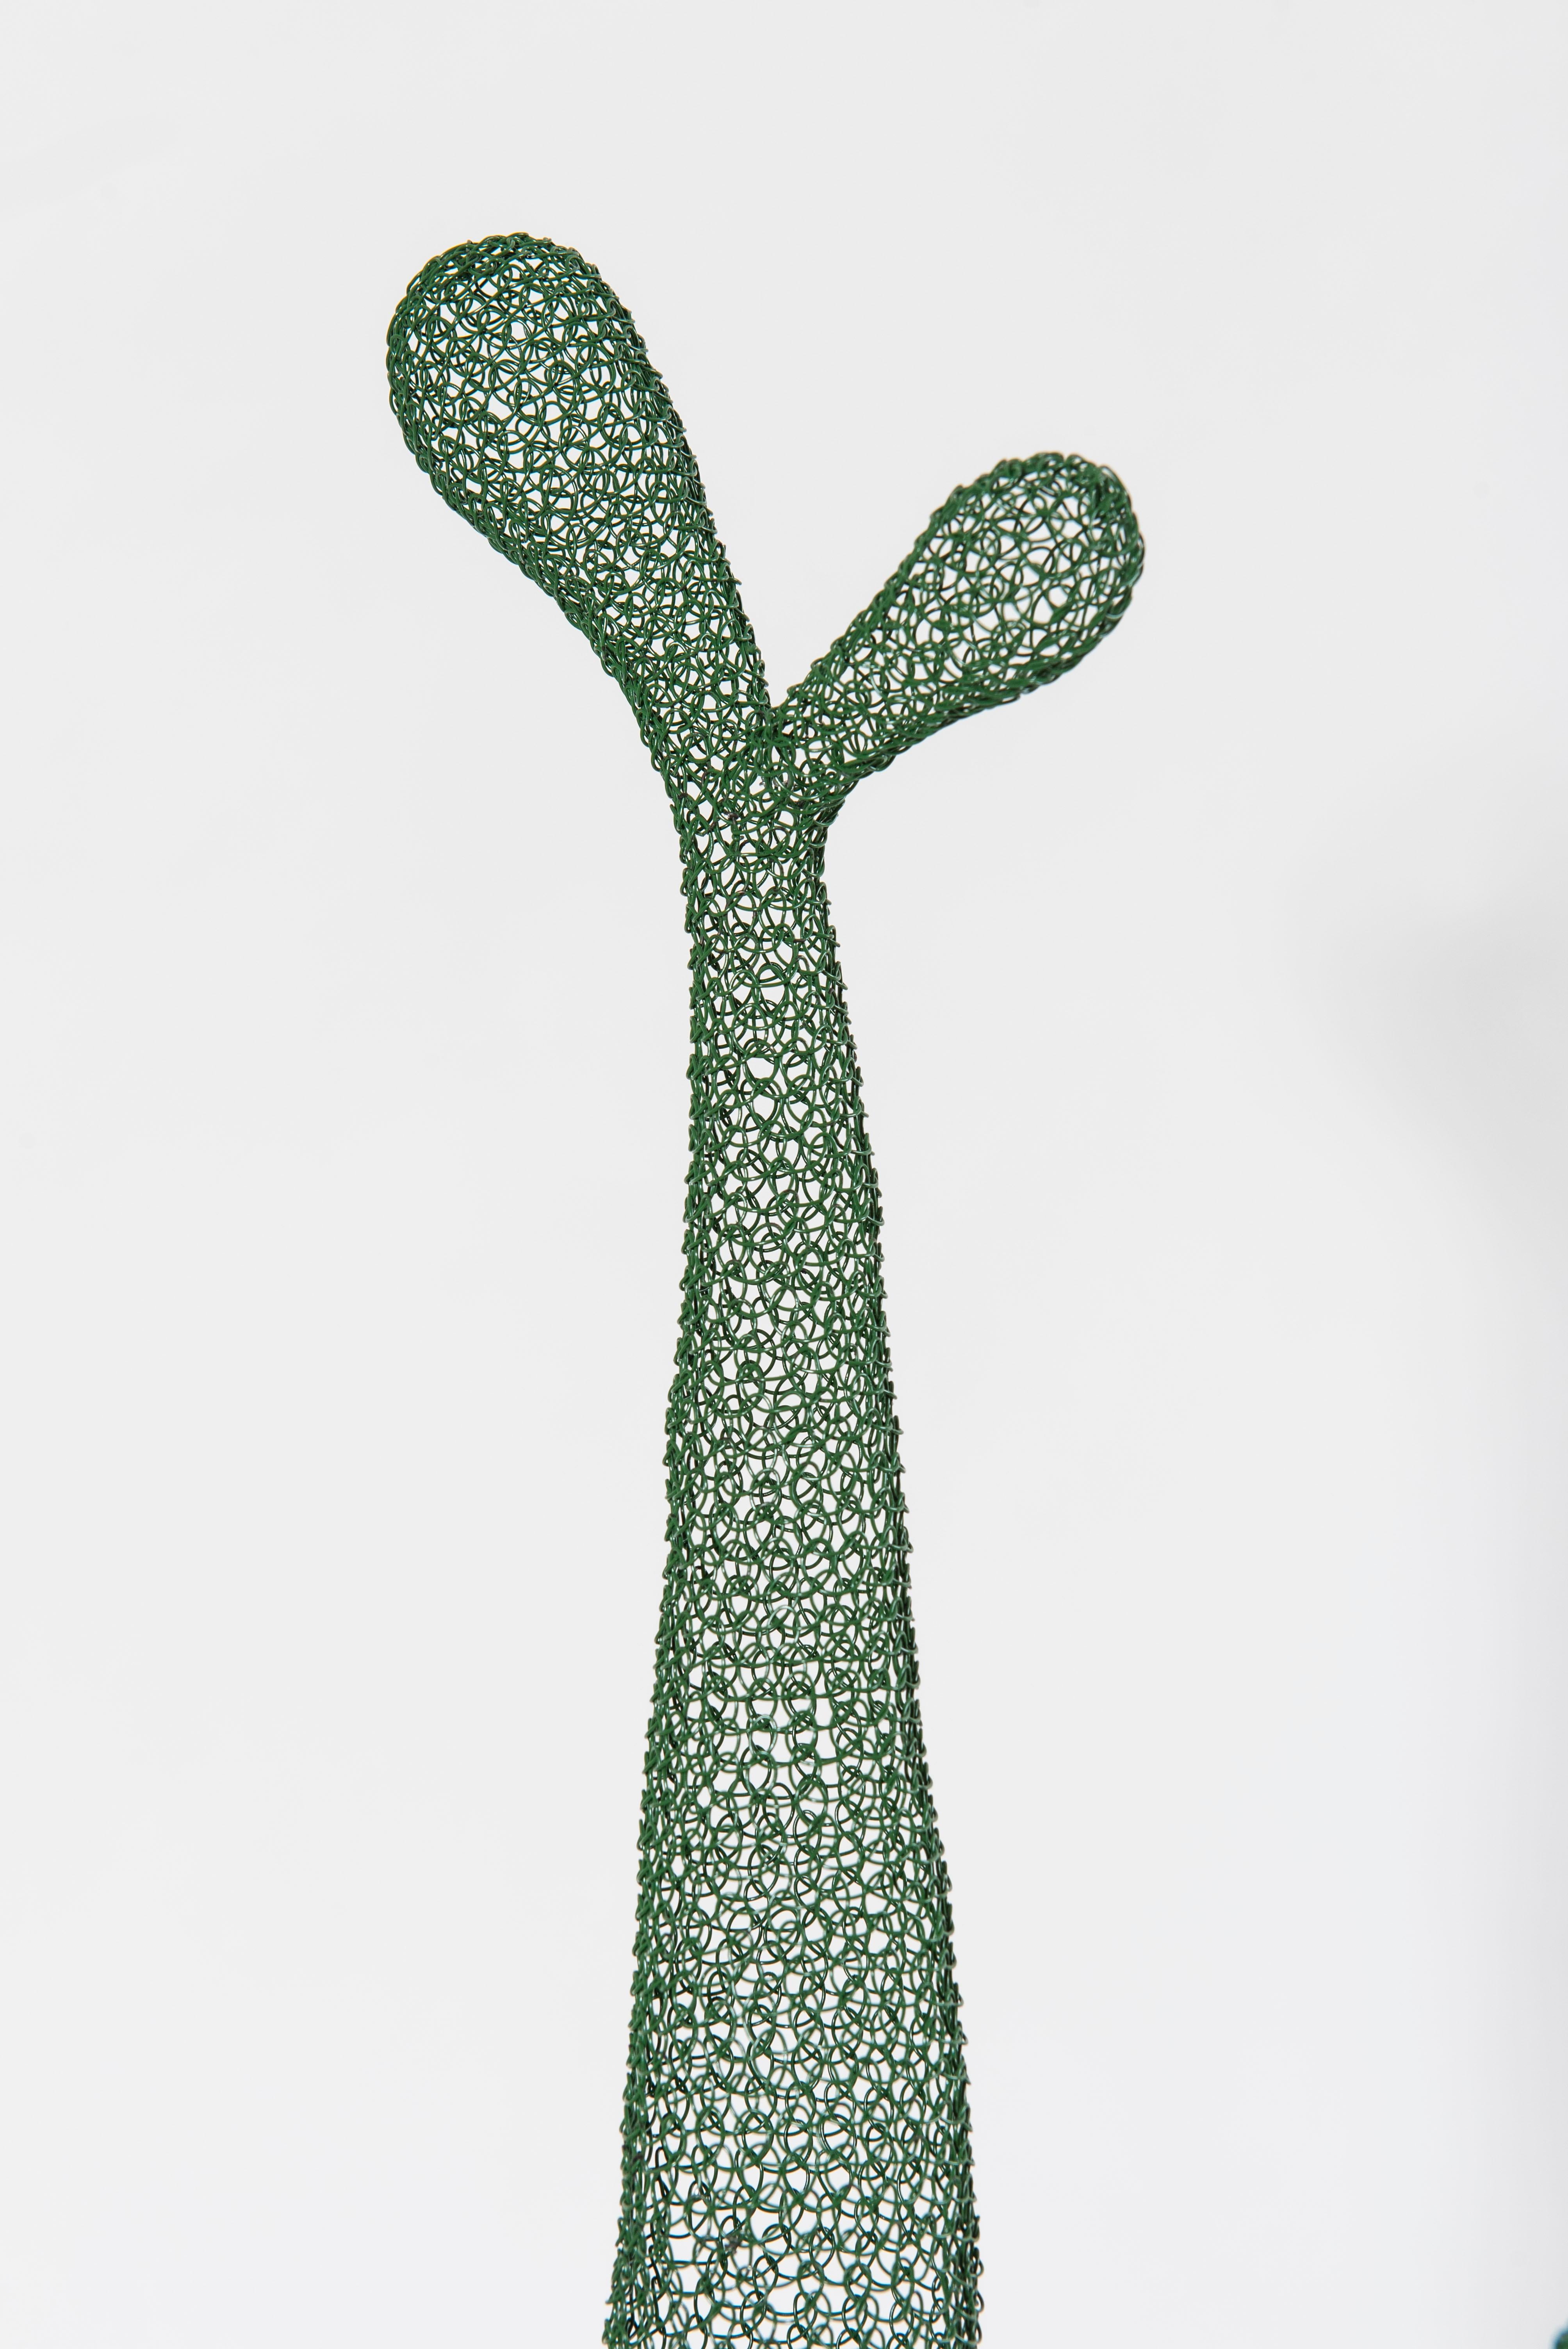 This mesh-work sculpture named « Cactus I » is entirely hand-knitted from a single metal wire plasticized in green. It was created and made by artist Delphine Grandvaux. This work consists of three similar and independent parts, each of which